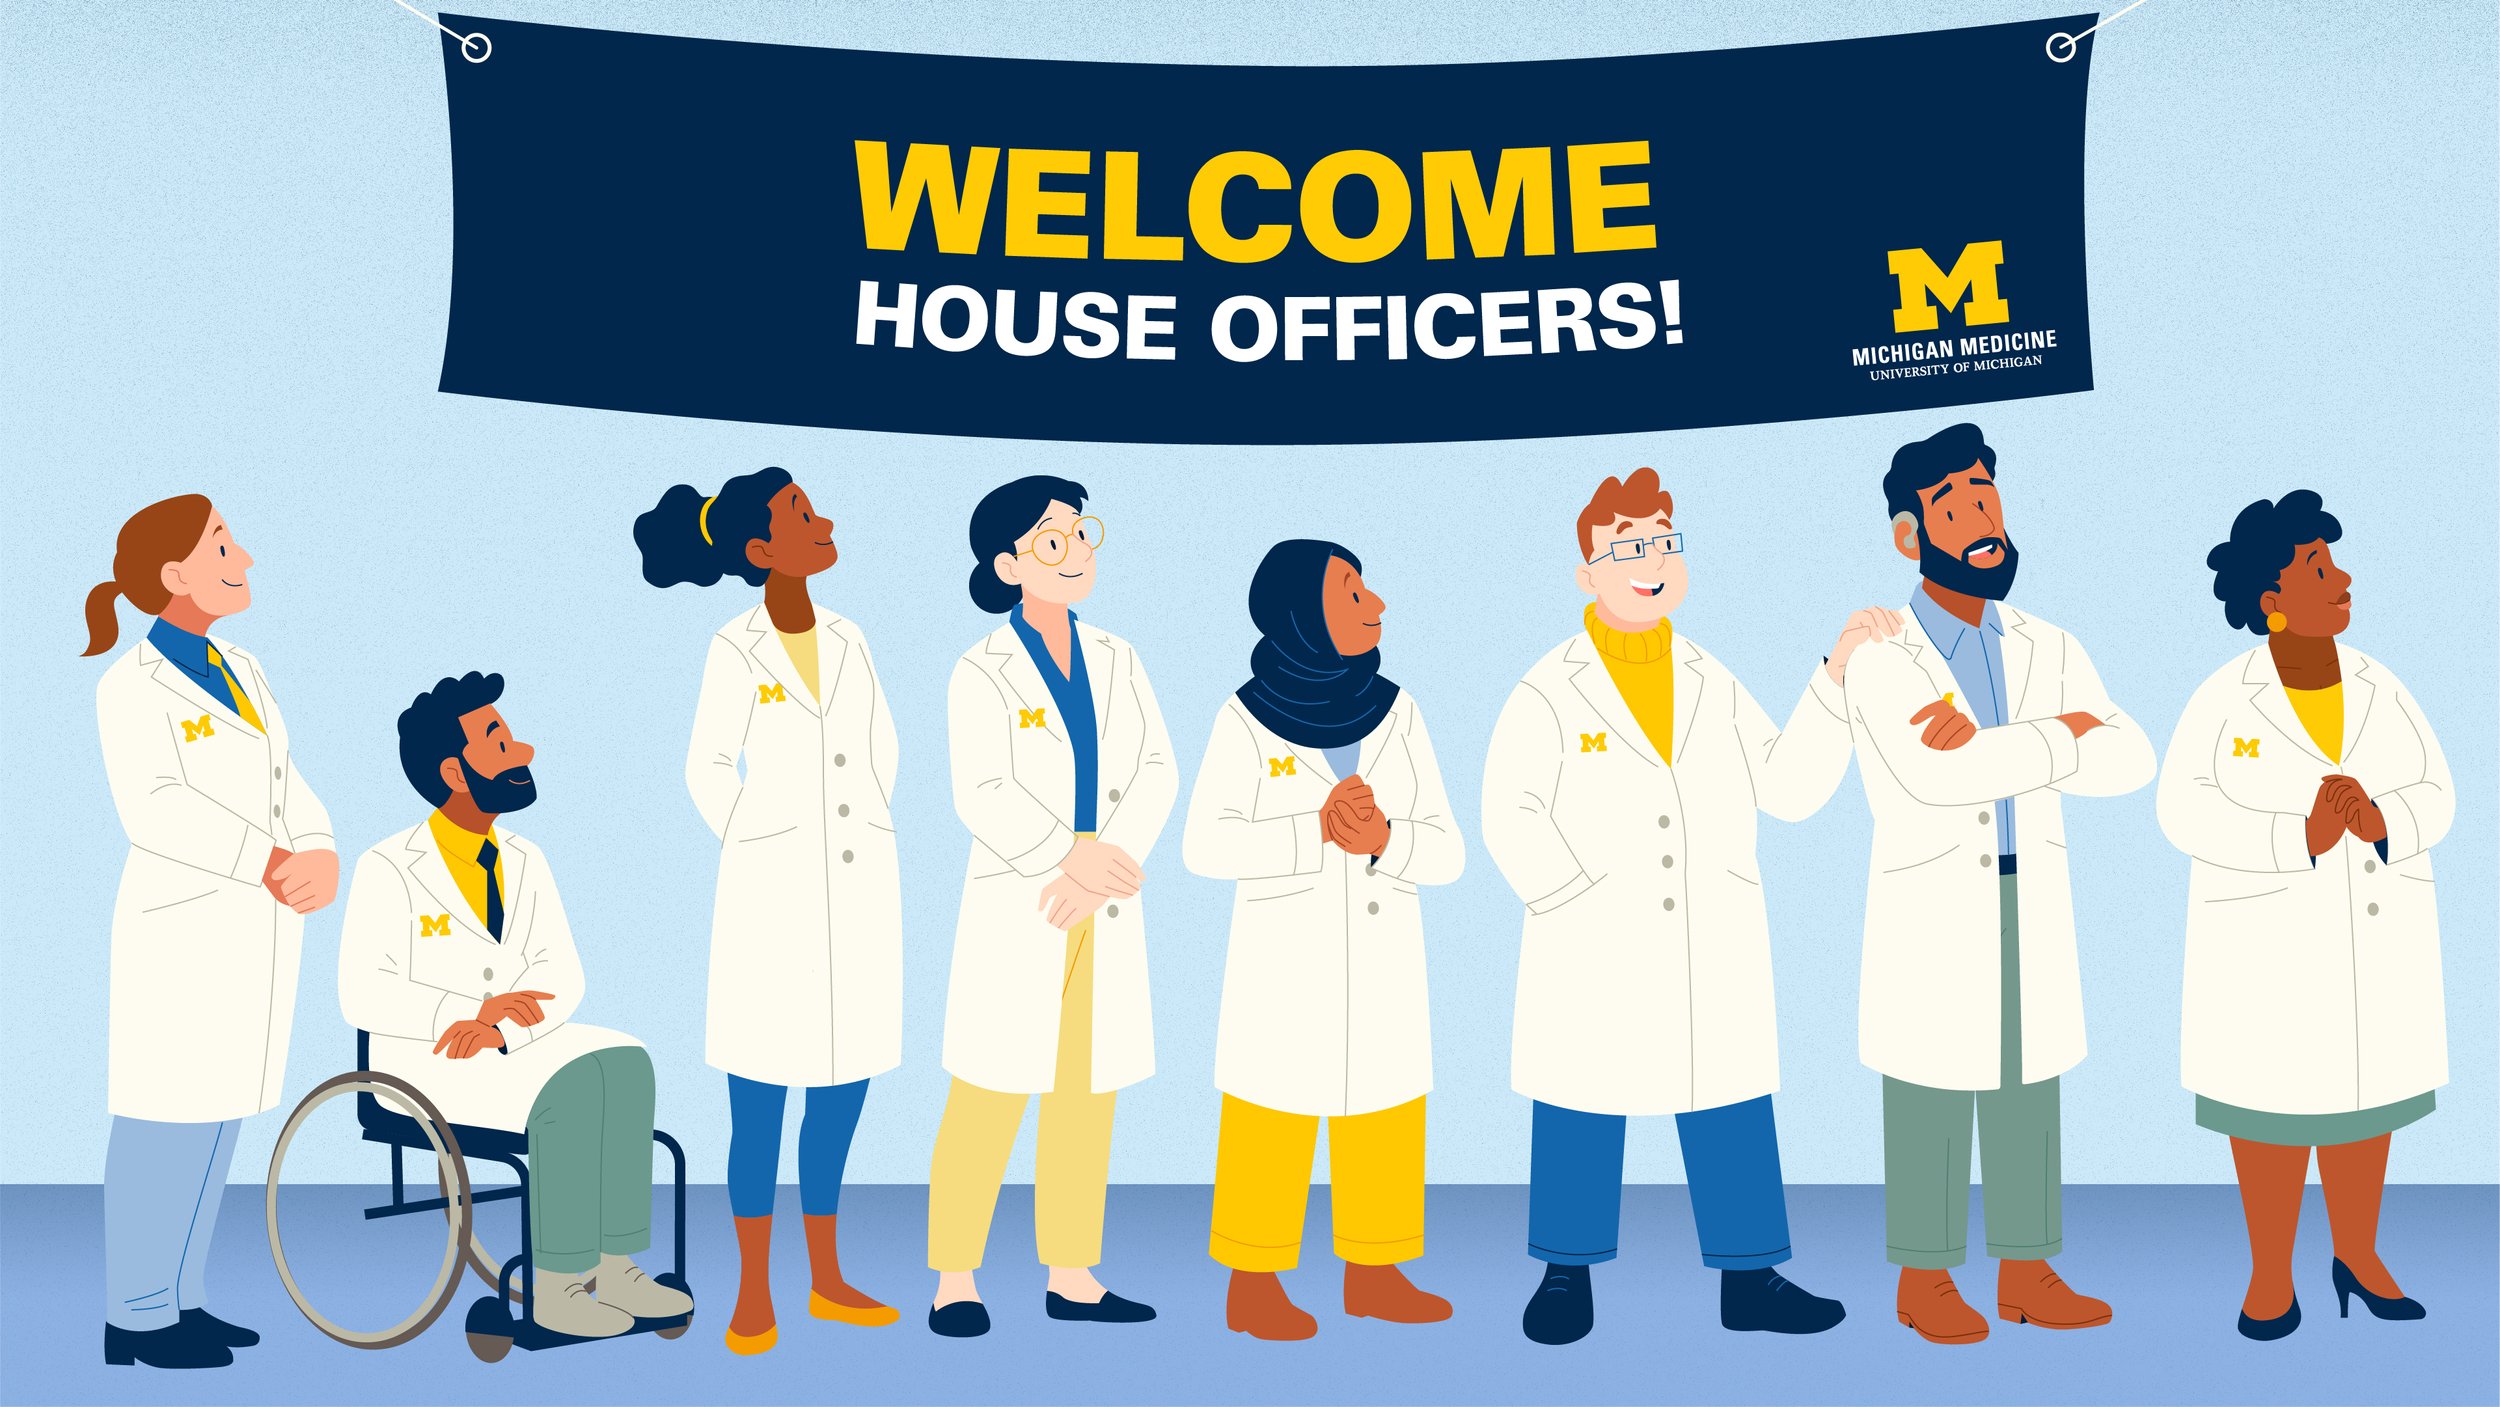 House Officer Welcome Graphic